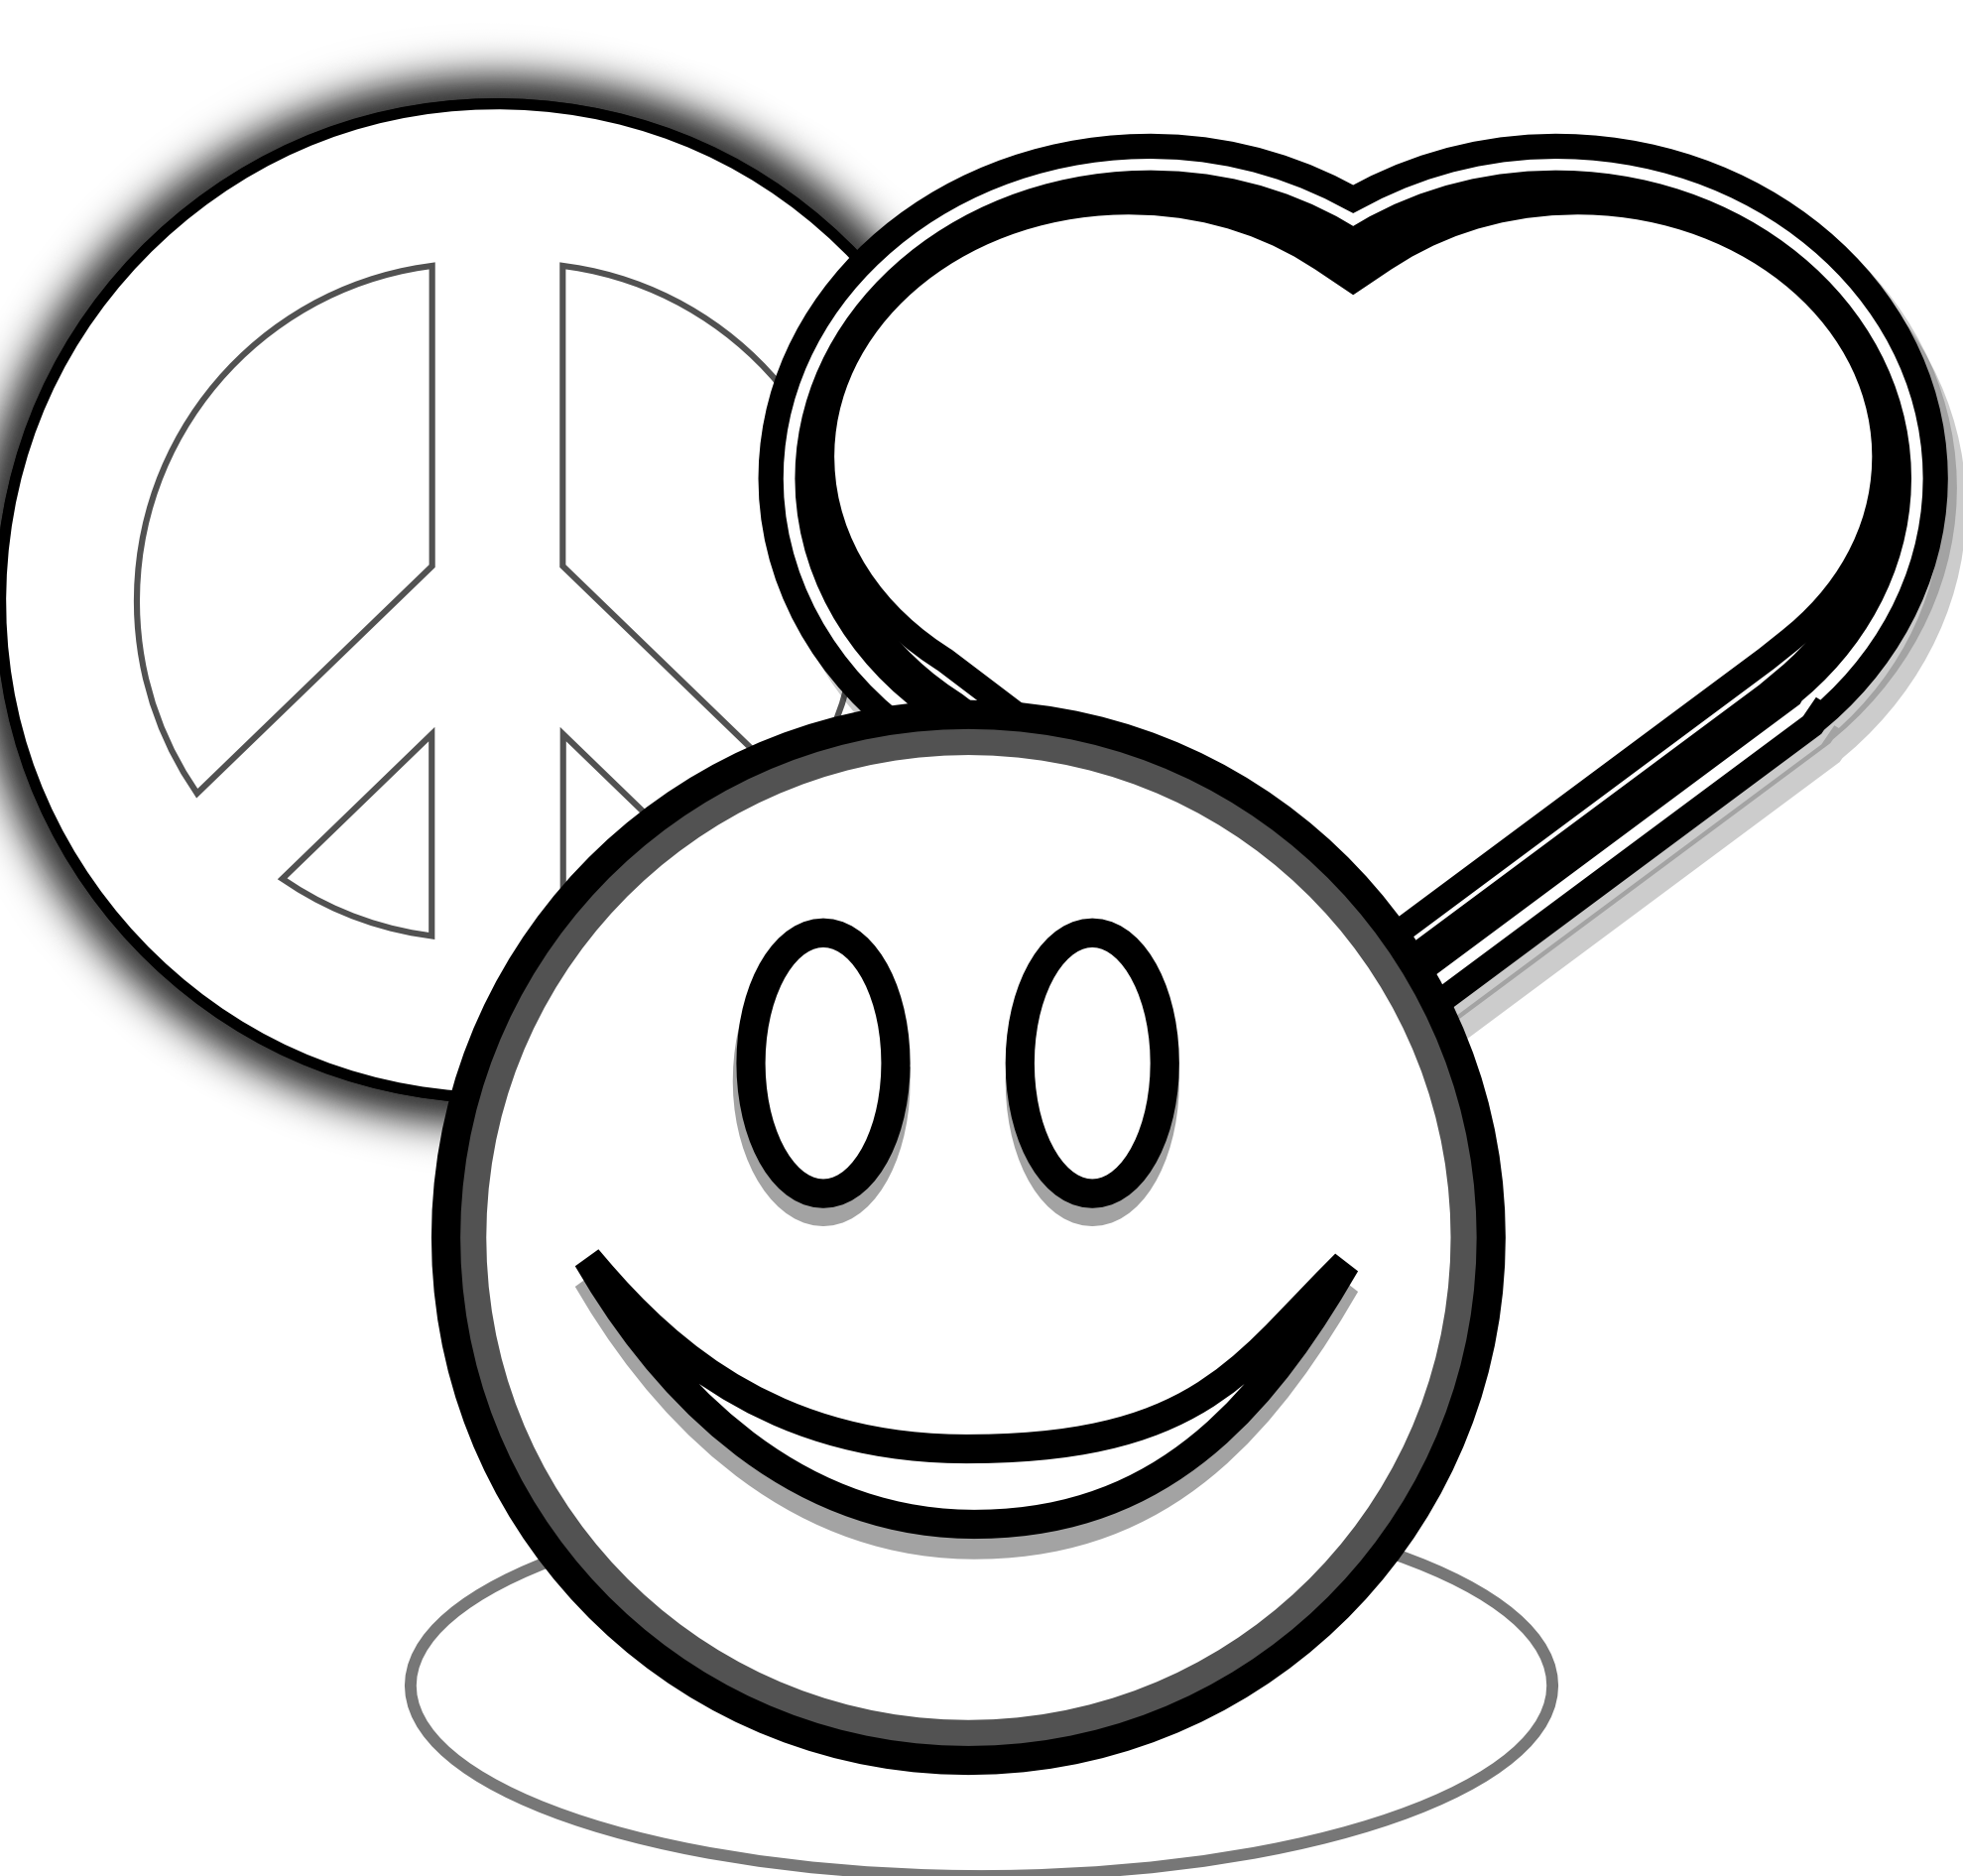 Peace Sign Coloring Pages Online | Coloring Page